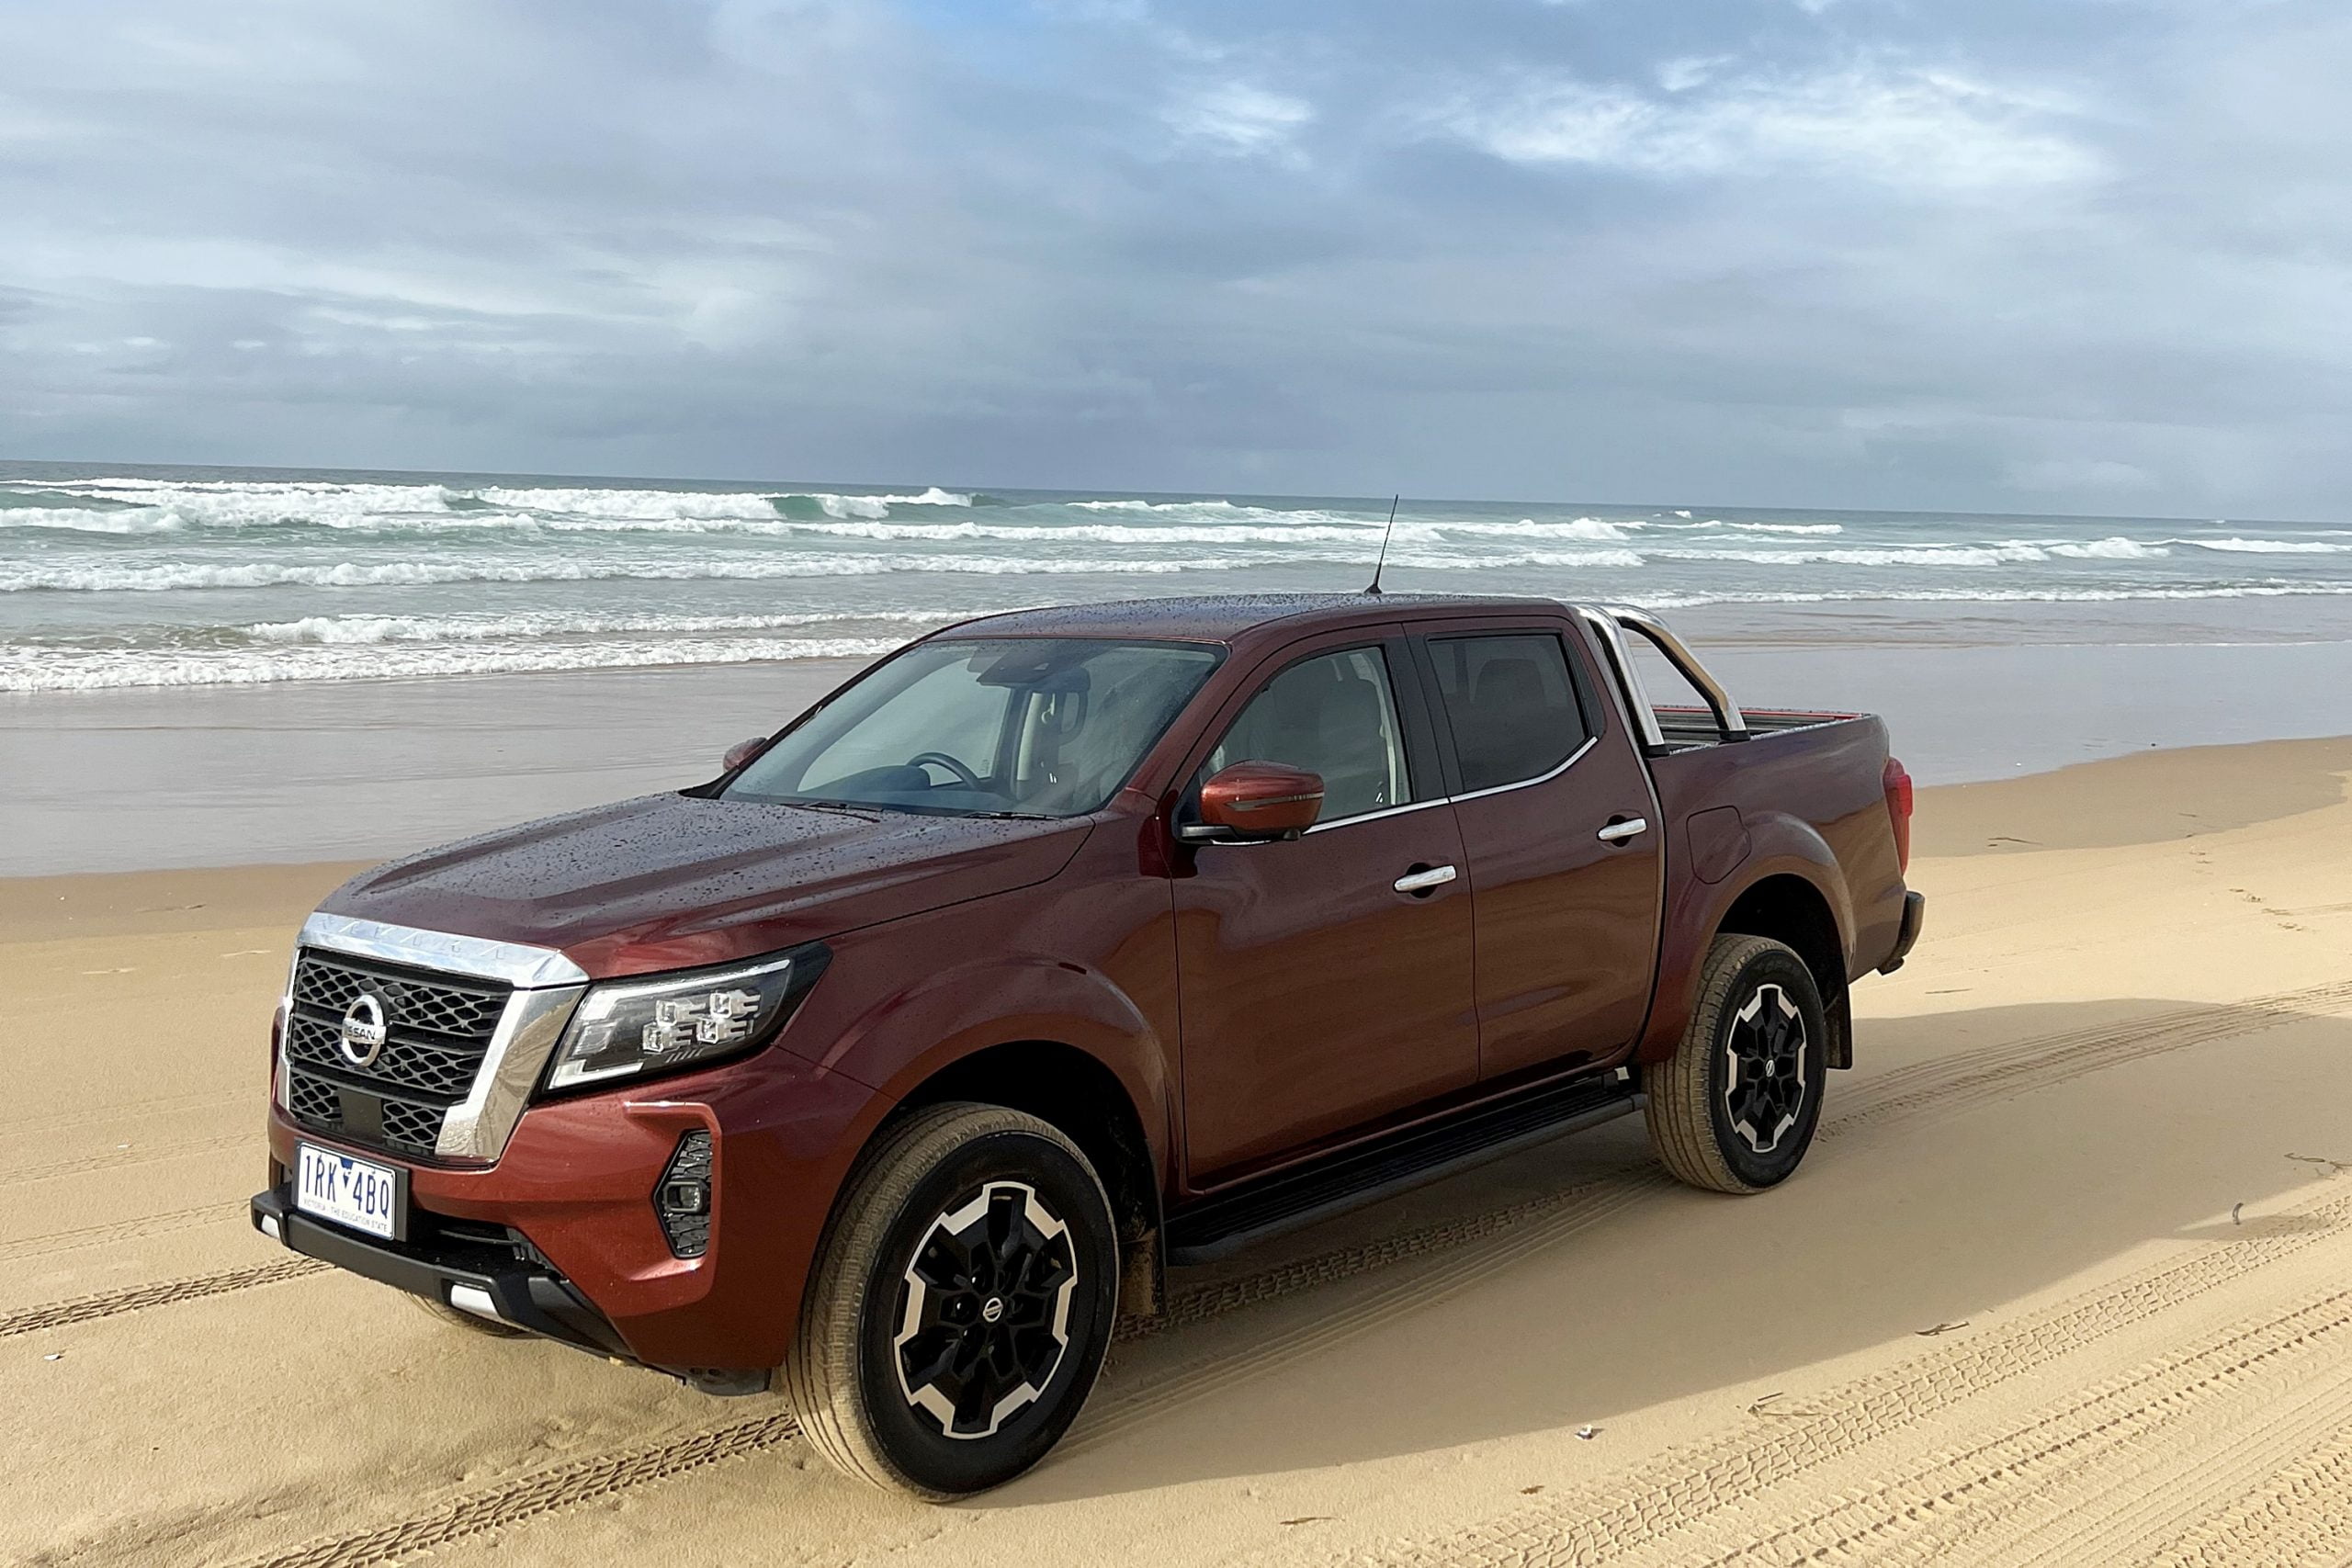 Nissan-Navara-2022-ST-X-4WD-Ute-front-qtr-scaled